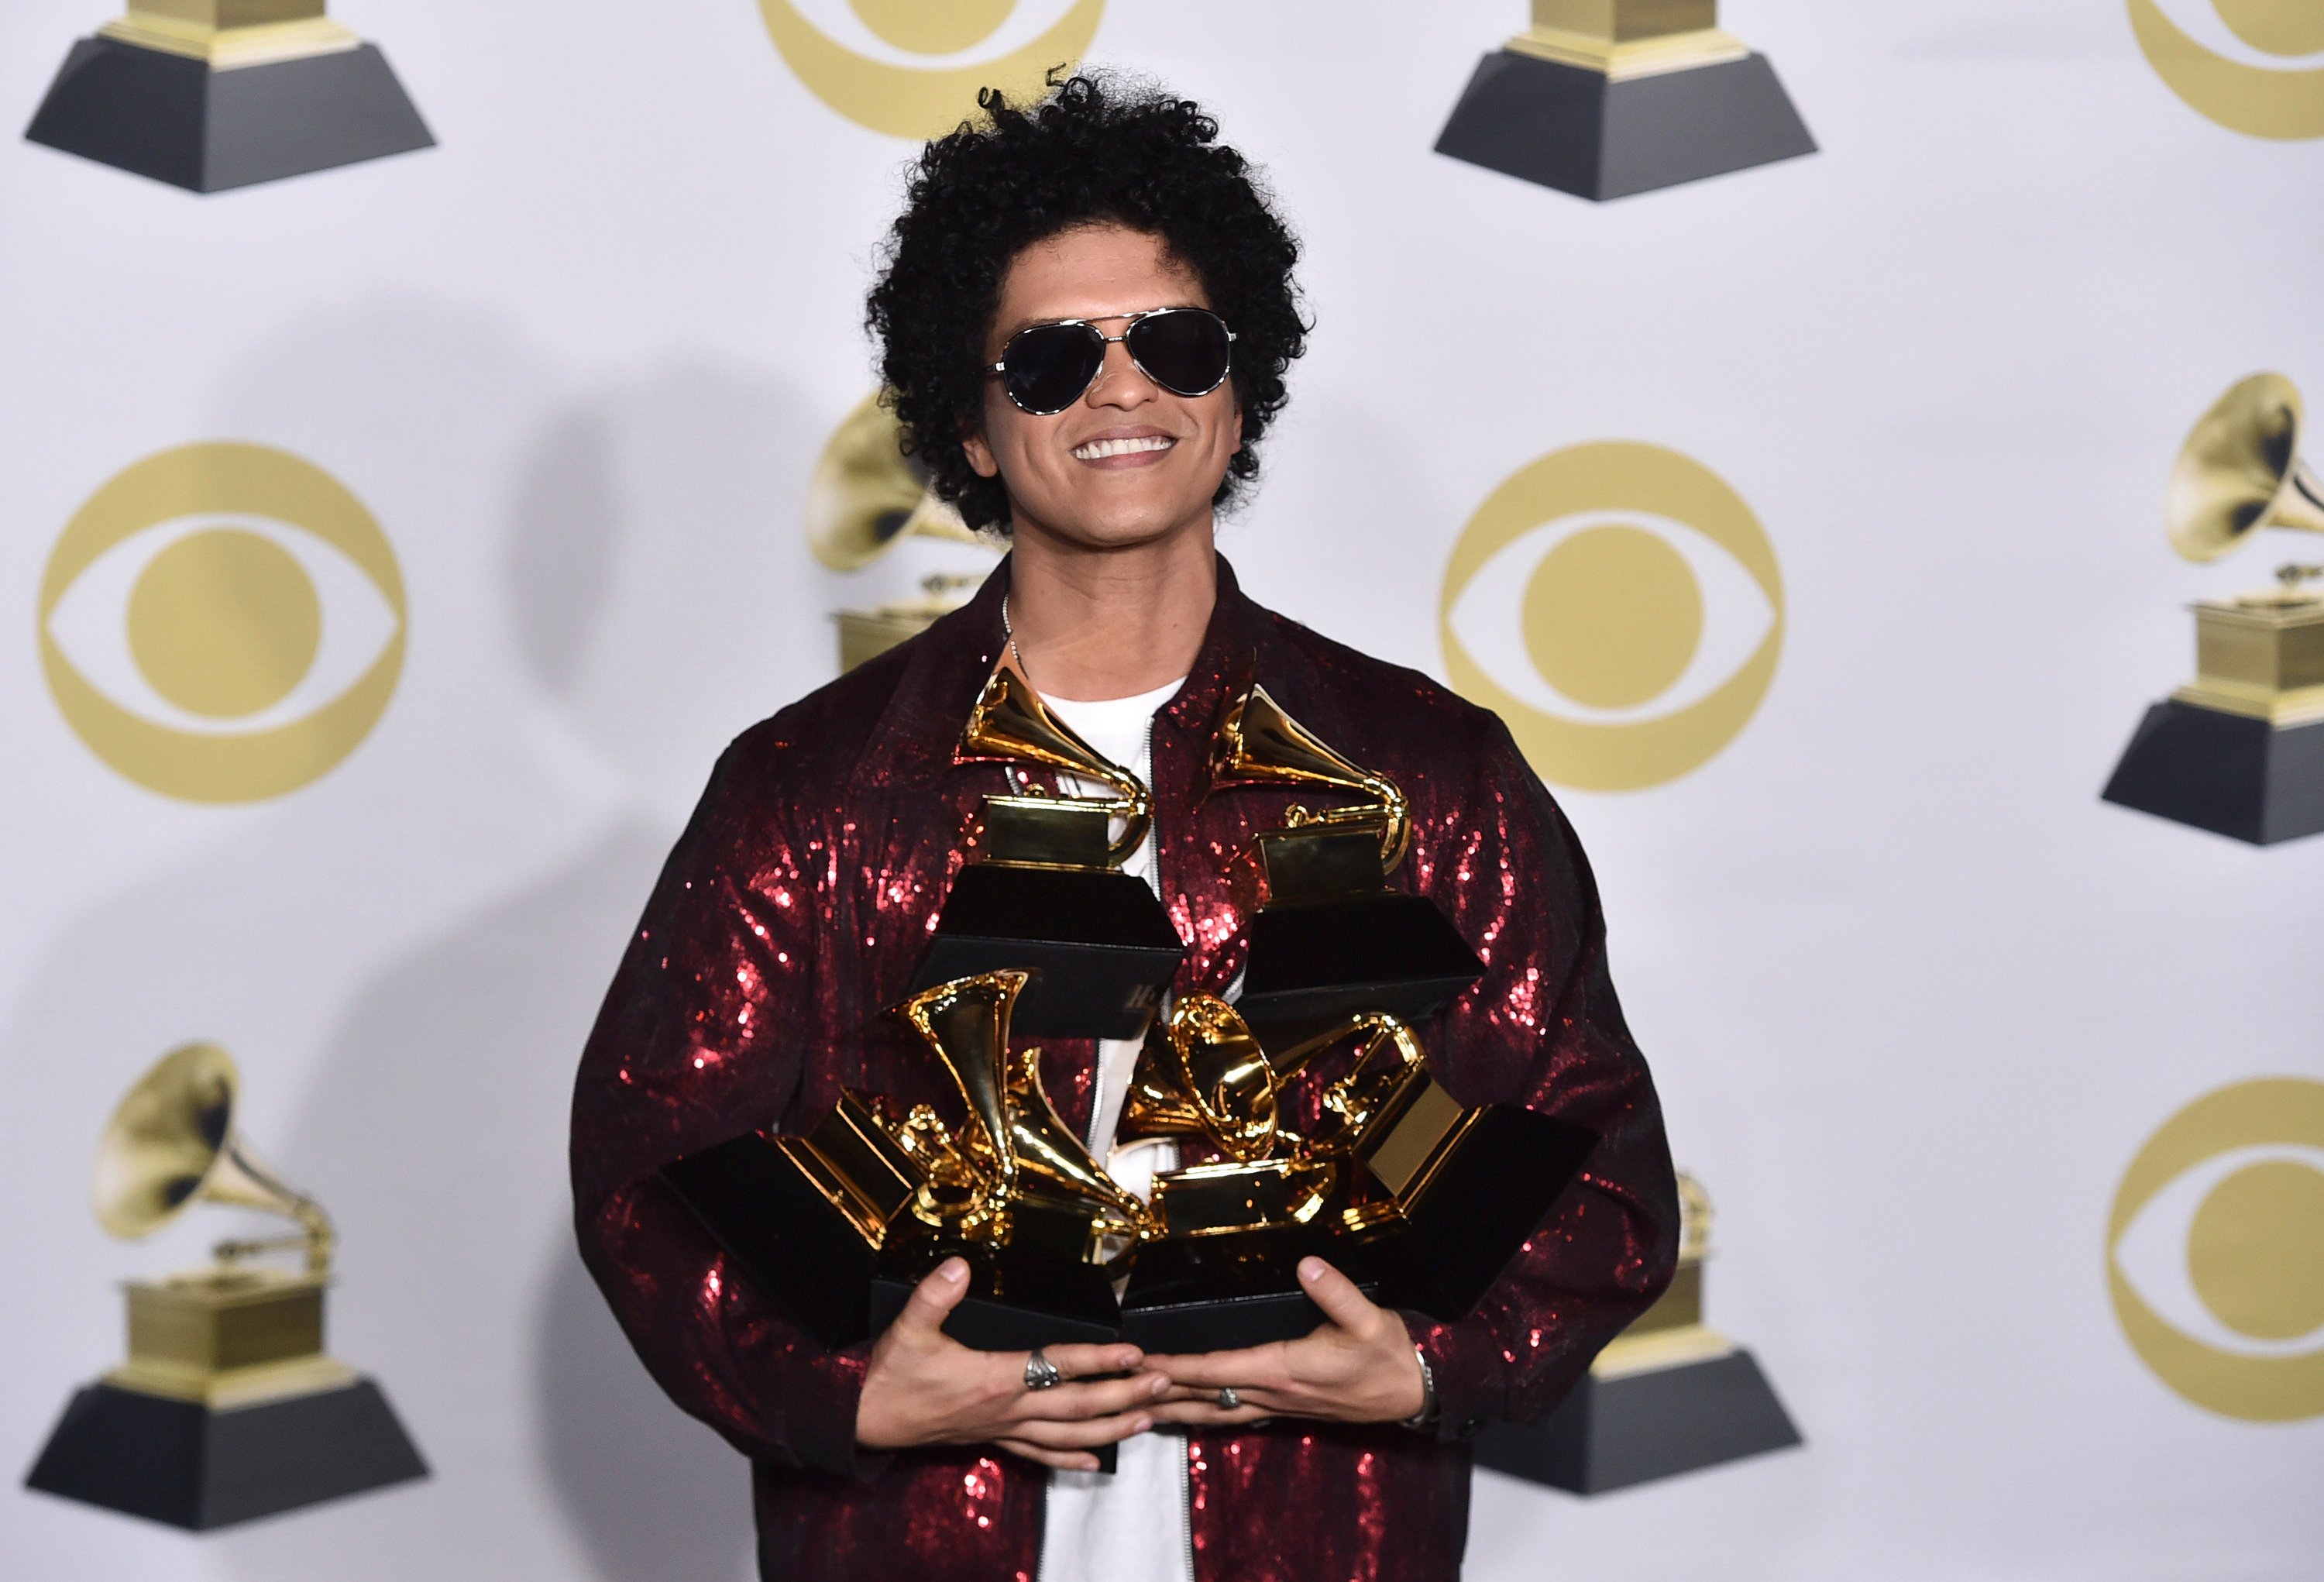 Pop star Bruno Mars is scheduled to perform in Kuala Lumpur on September 17. Photo: AP